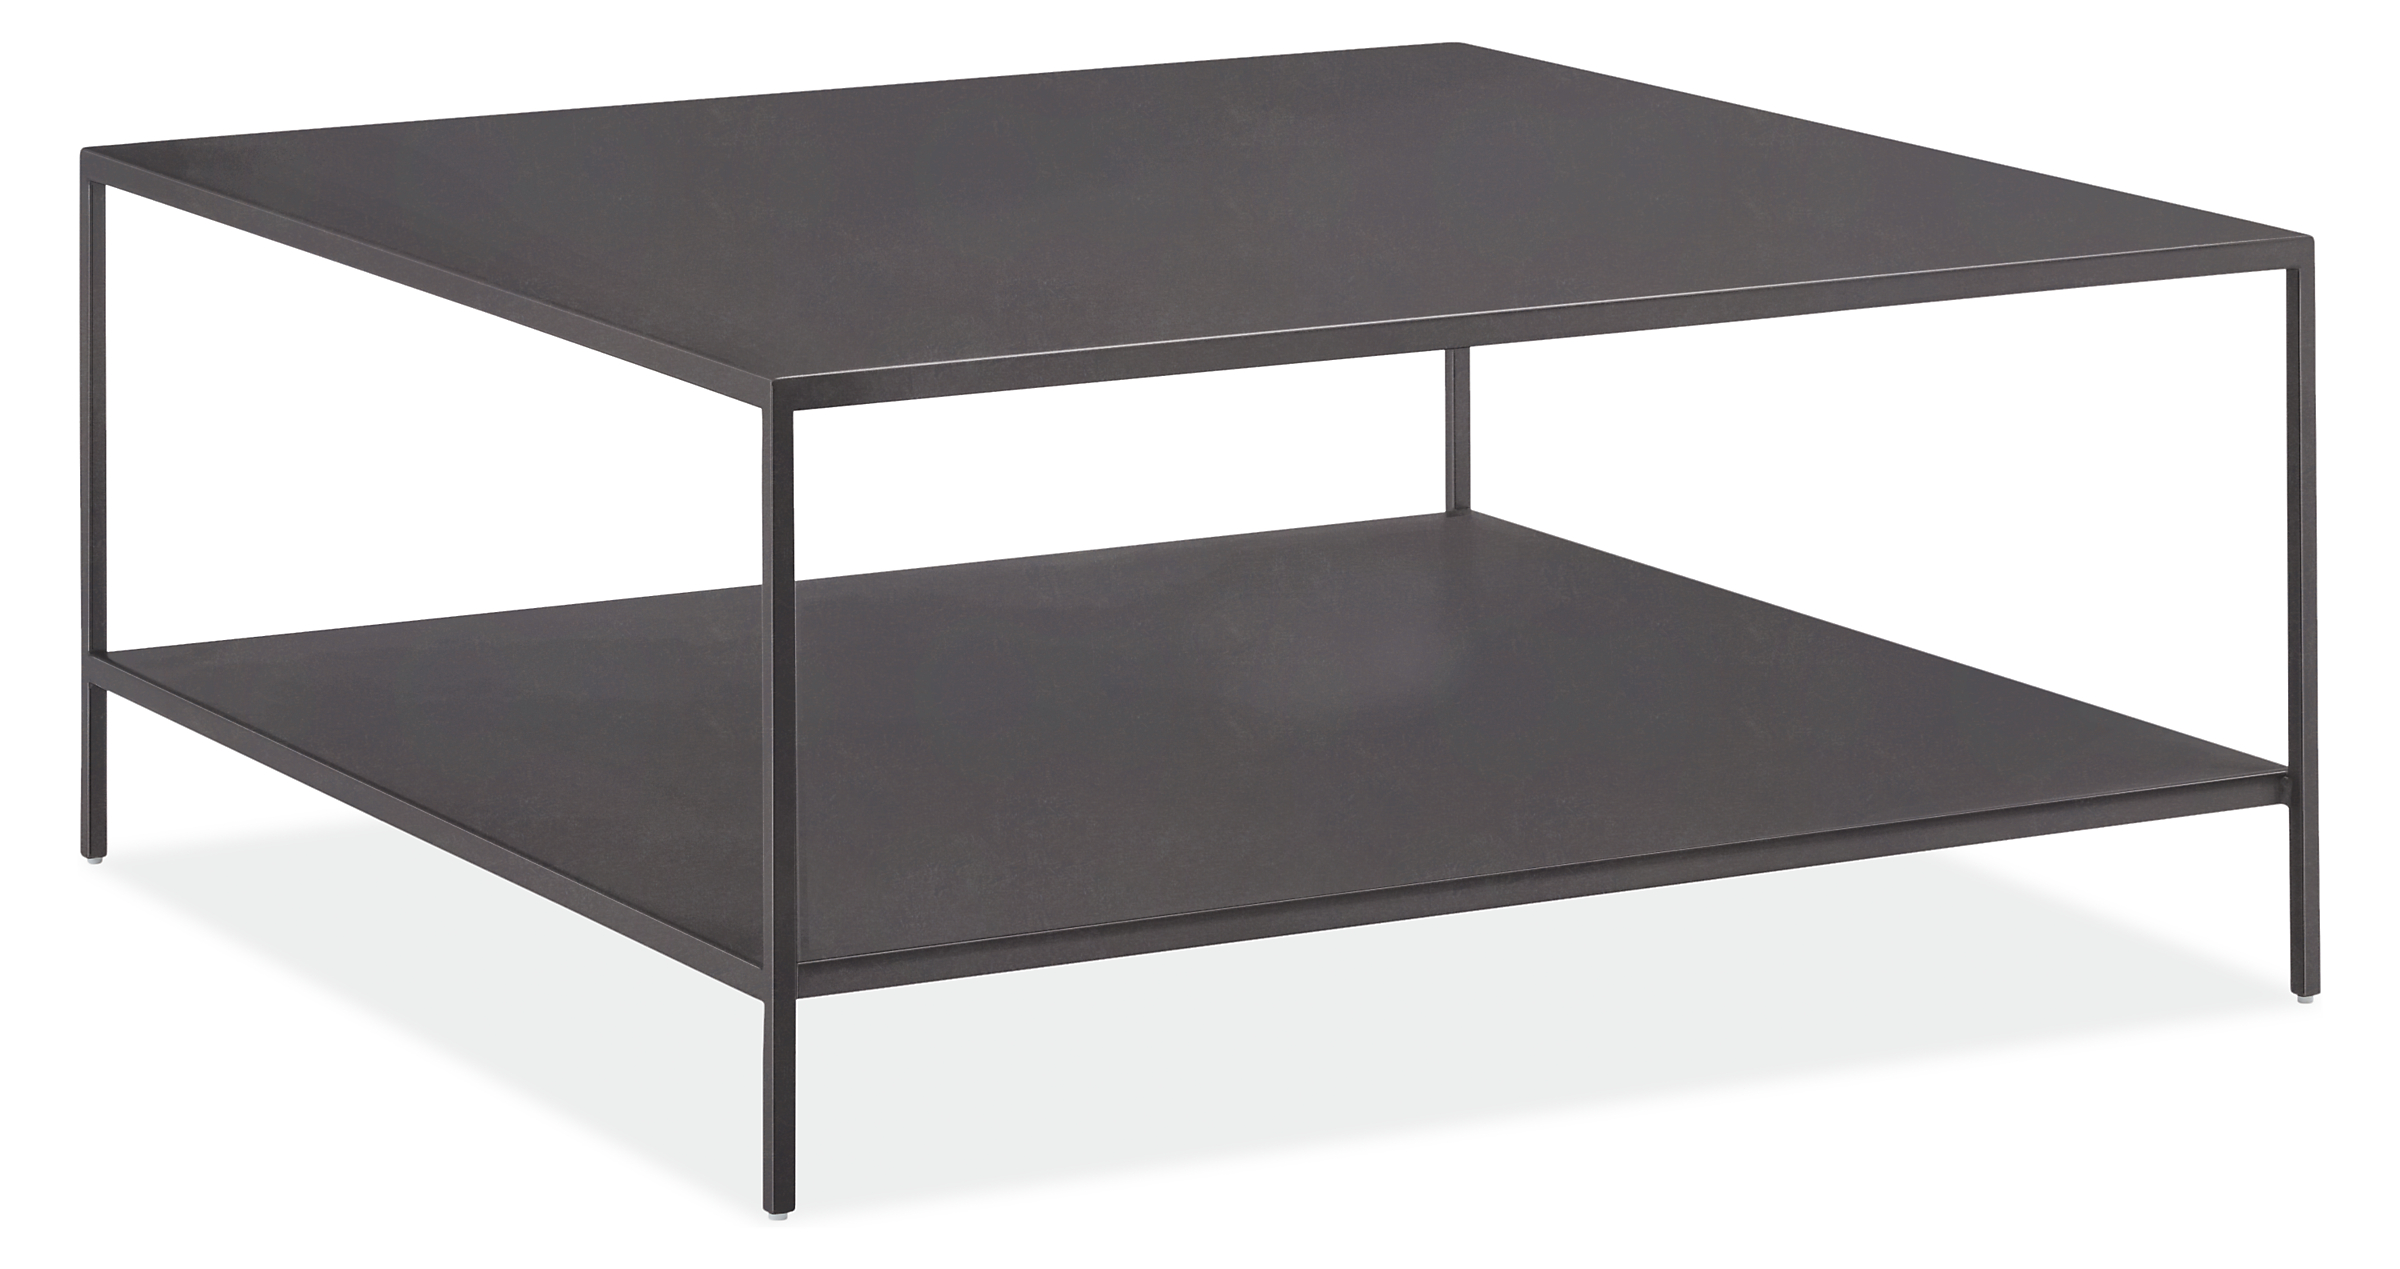 Slim 36w 36d 16h Square Coffee Table With Shelf